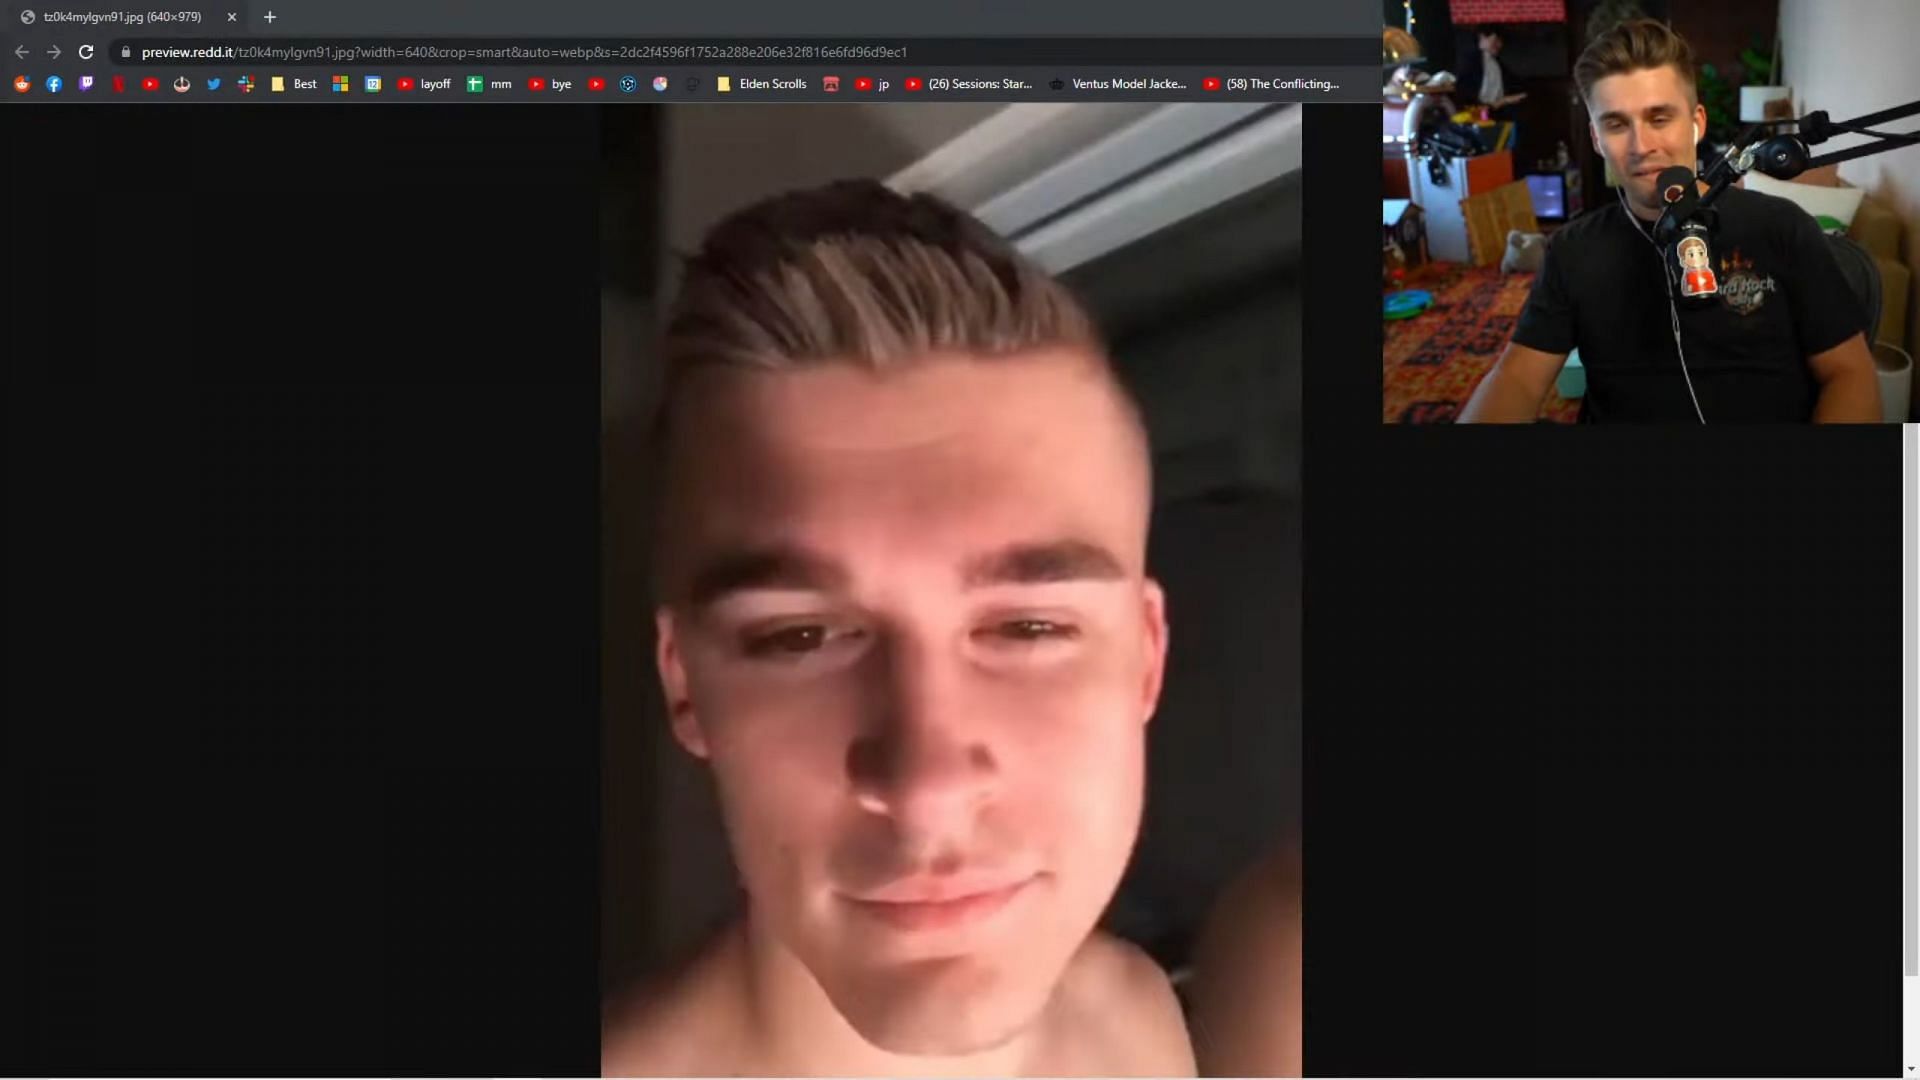 YouTube Gaming streamer showcasing an old, unedited image of his old hair (Image via Mogul Mail/YouTube)